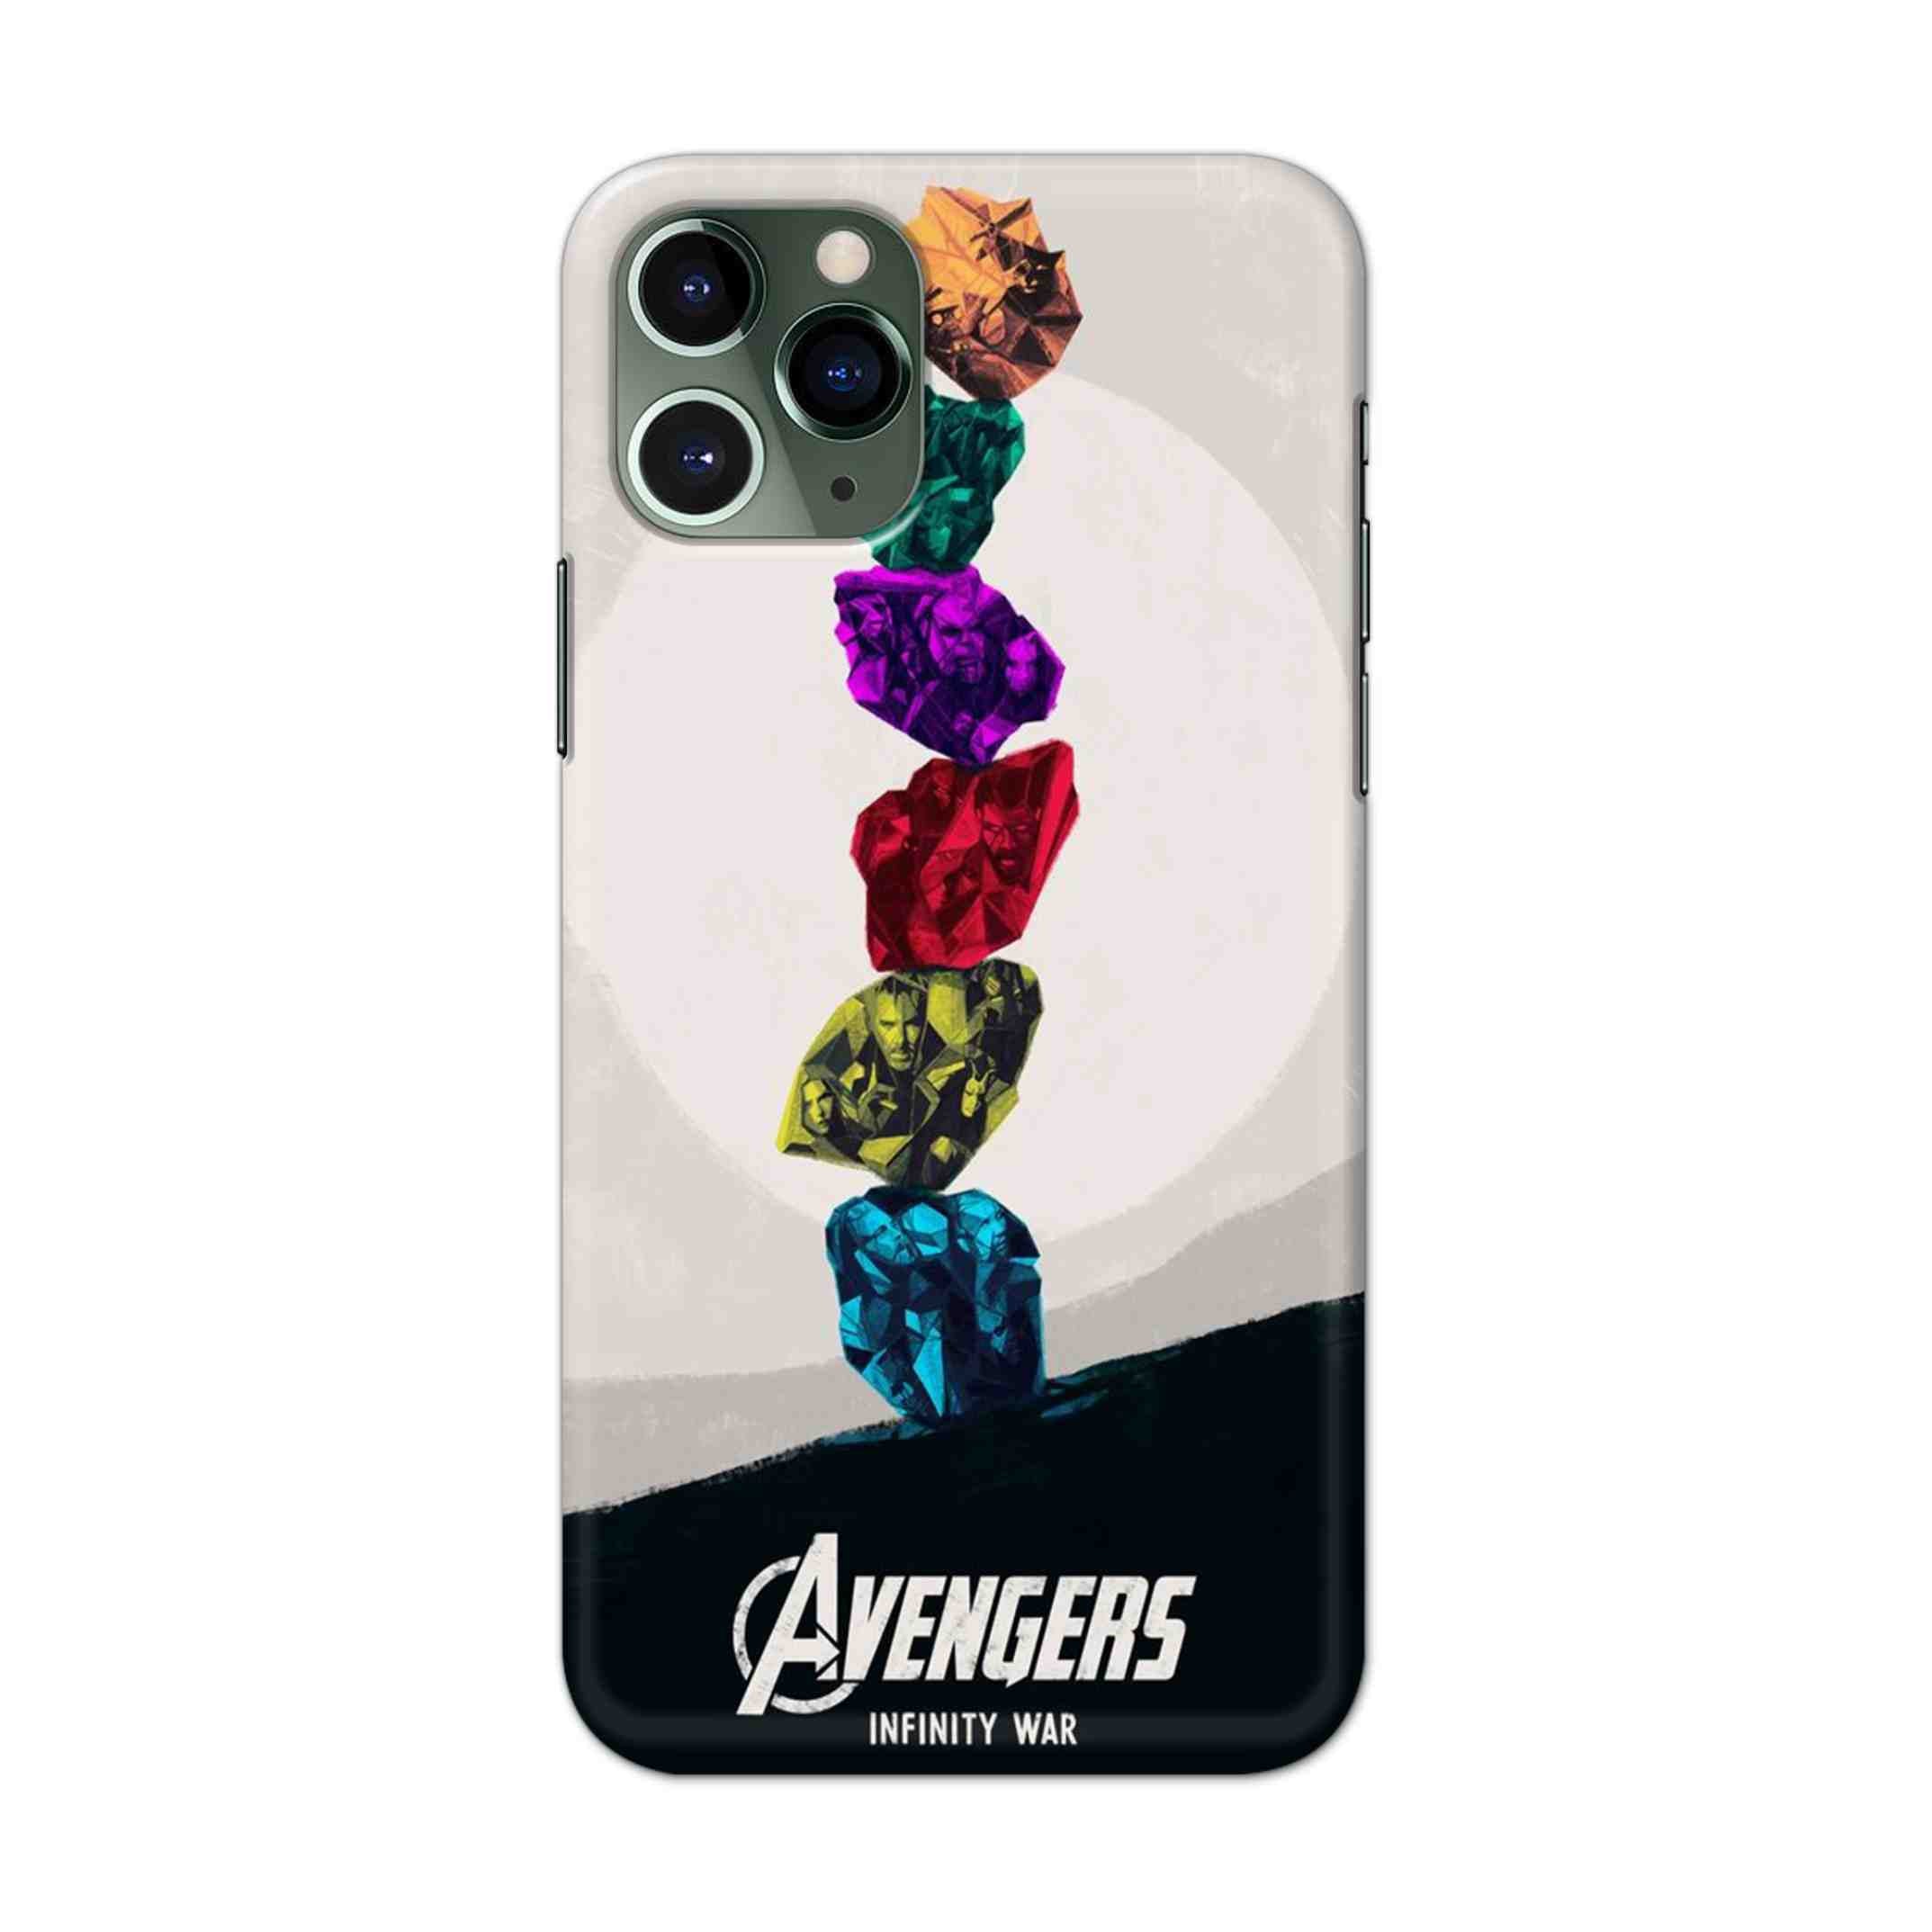 Buy Avengers Stone Hard Back Mobile Phone Case/Cover For iPhone 11 Pro Max Online